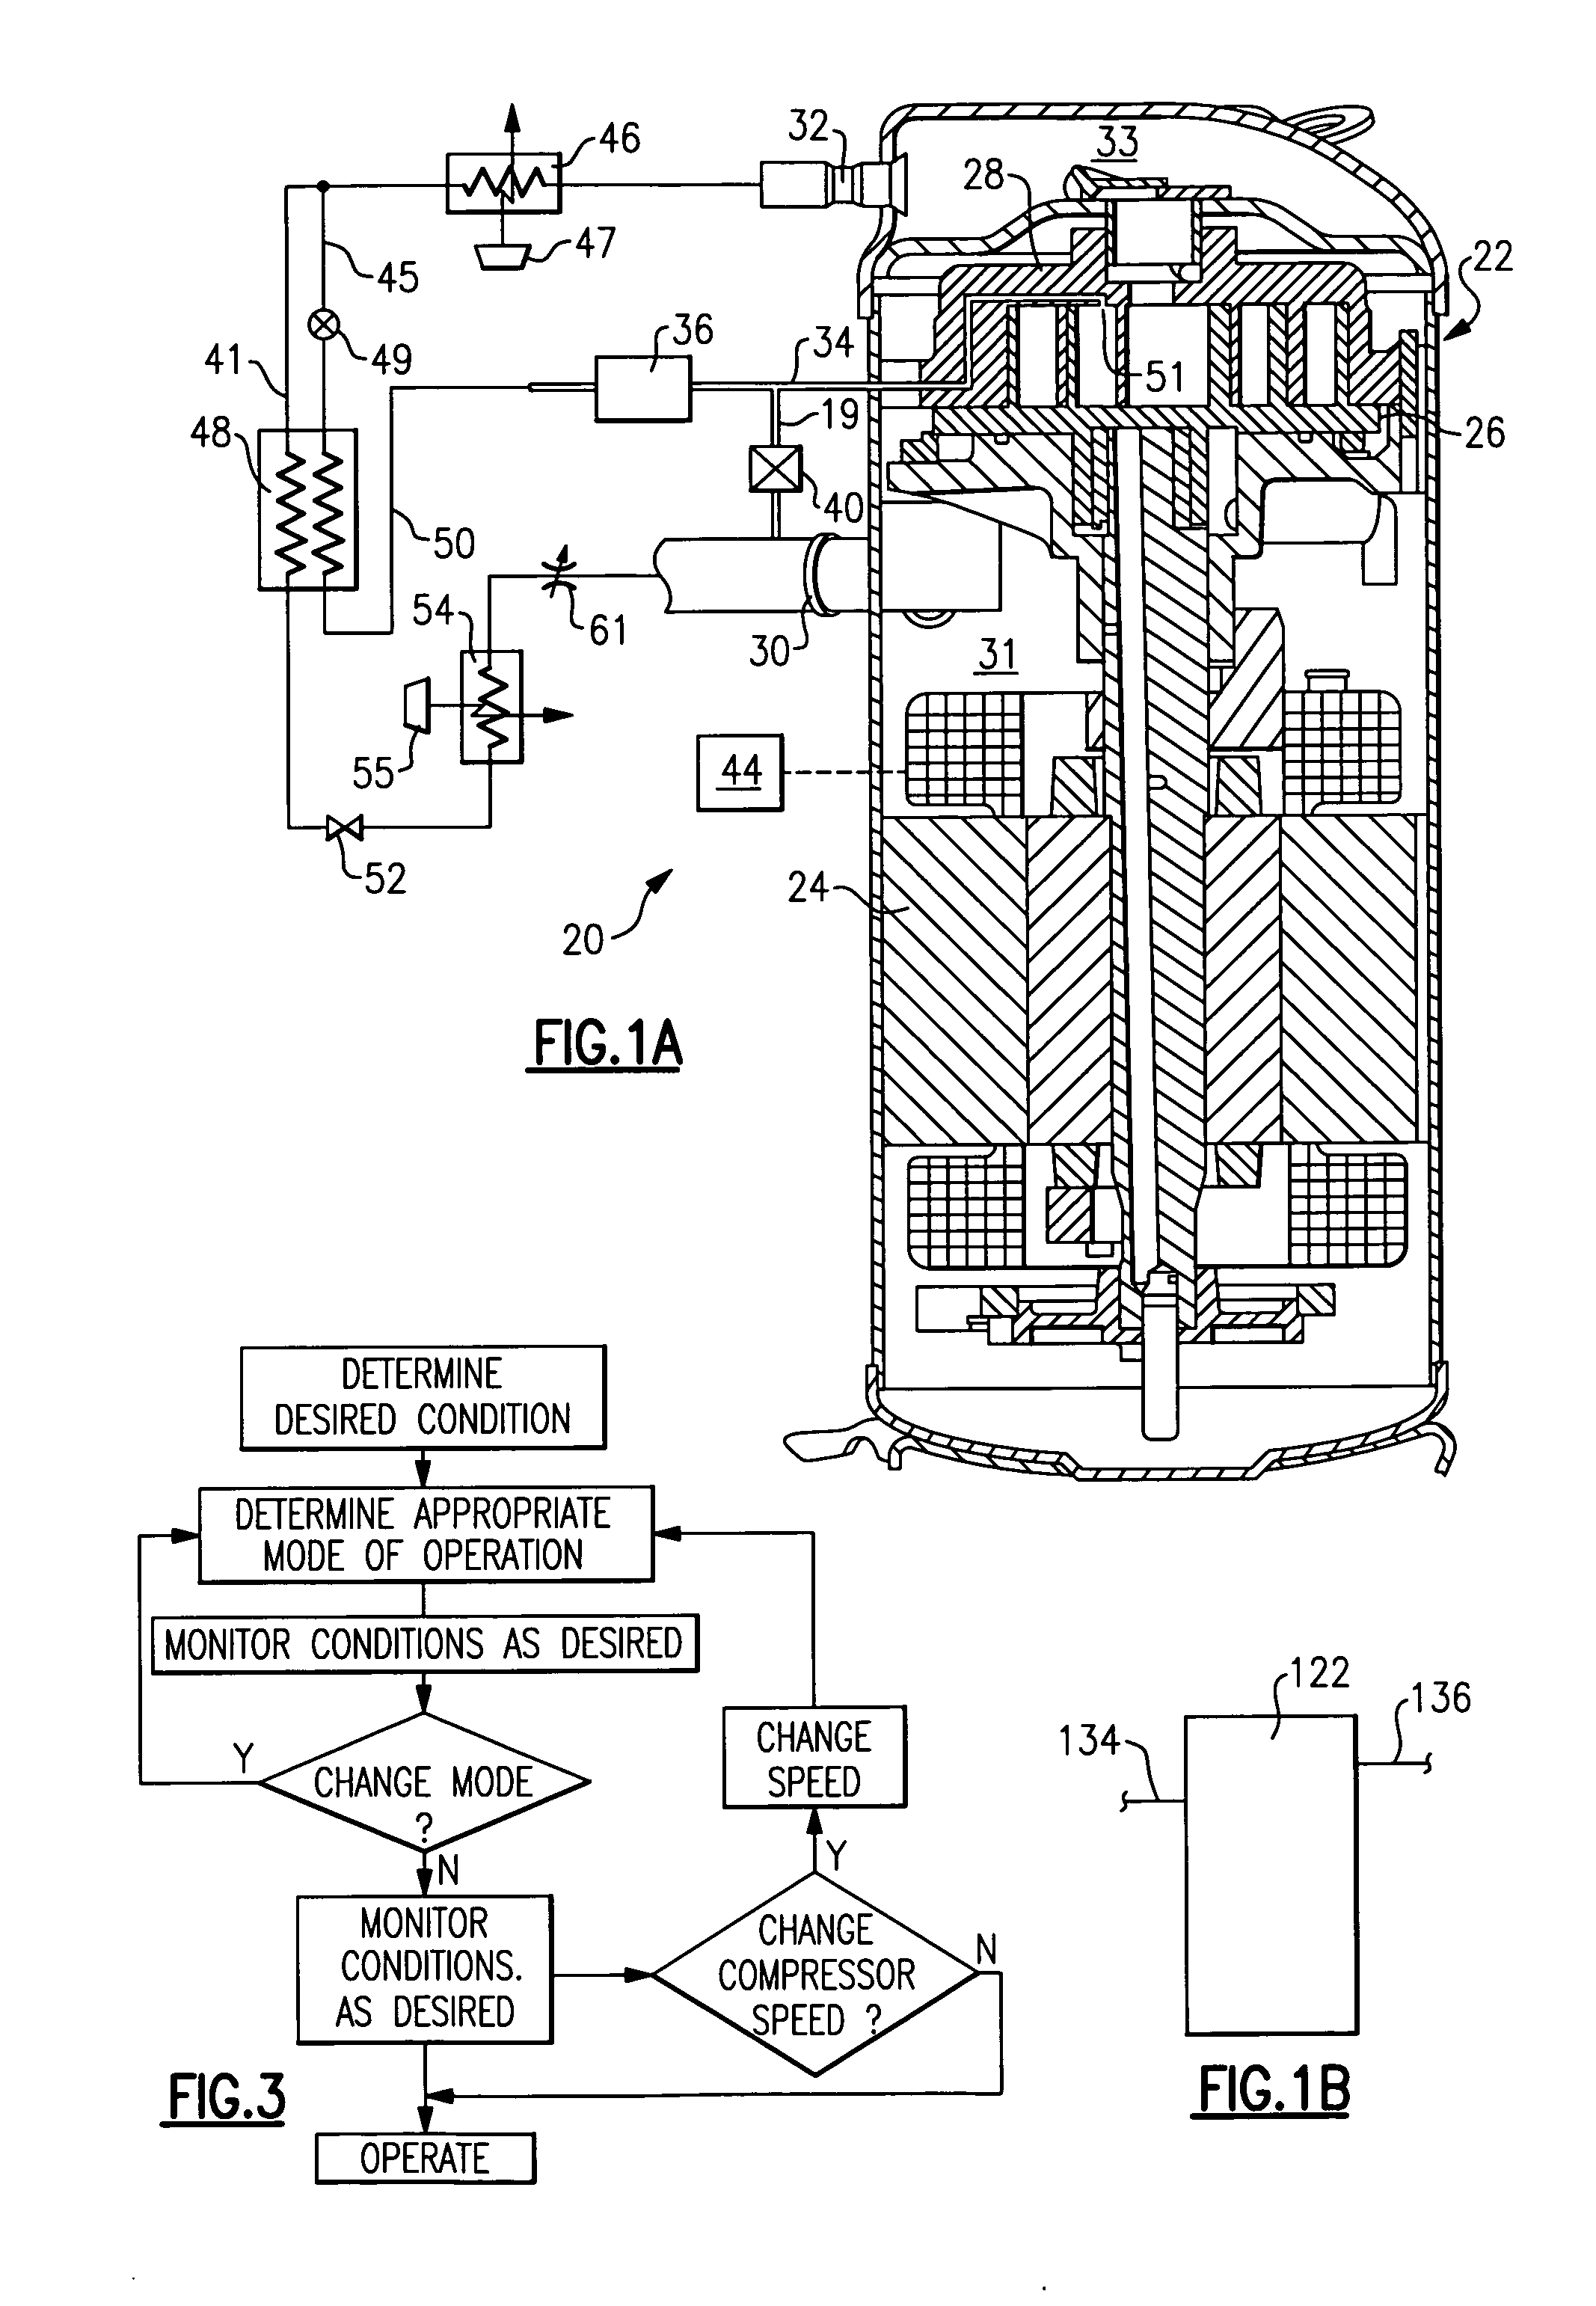 Refrigerant system with multi-speed scroll compressor and economizer circuit